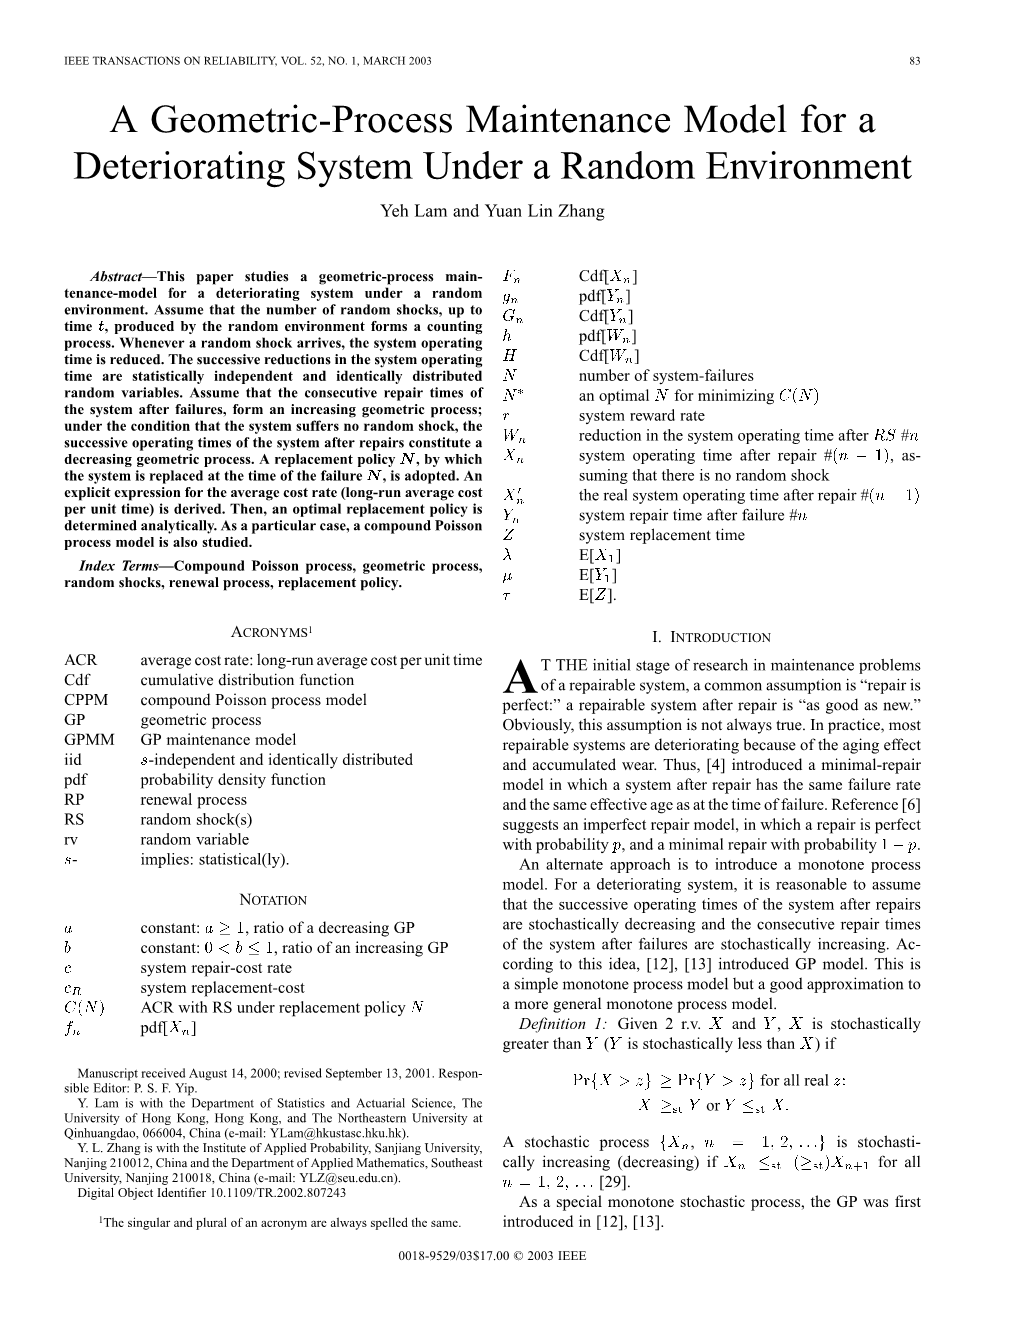 A Geometric-Process Maintenance Model for a Deteriorating System Under a Random Environment Yeh Lam and Yuan Lin Zhang